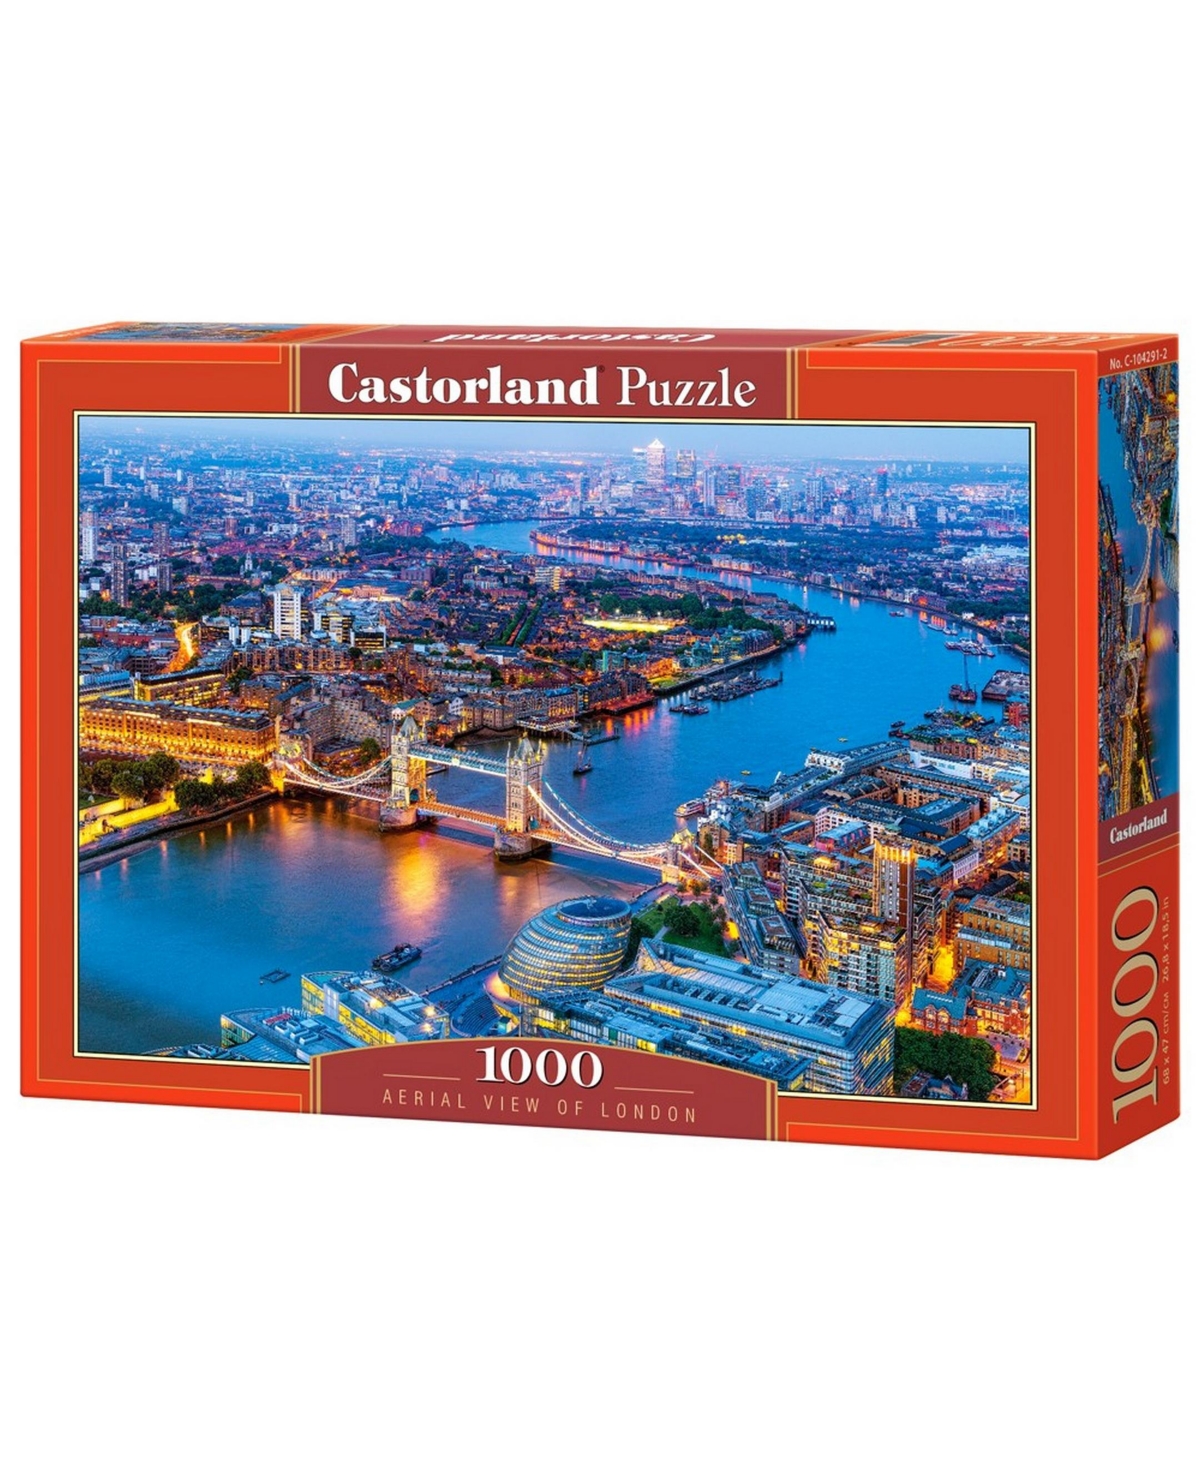 Castorland Aerial View Of London Jigsaw Puzzle Set, 1000 Piece In Multicolor